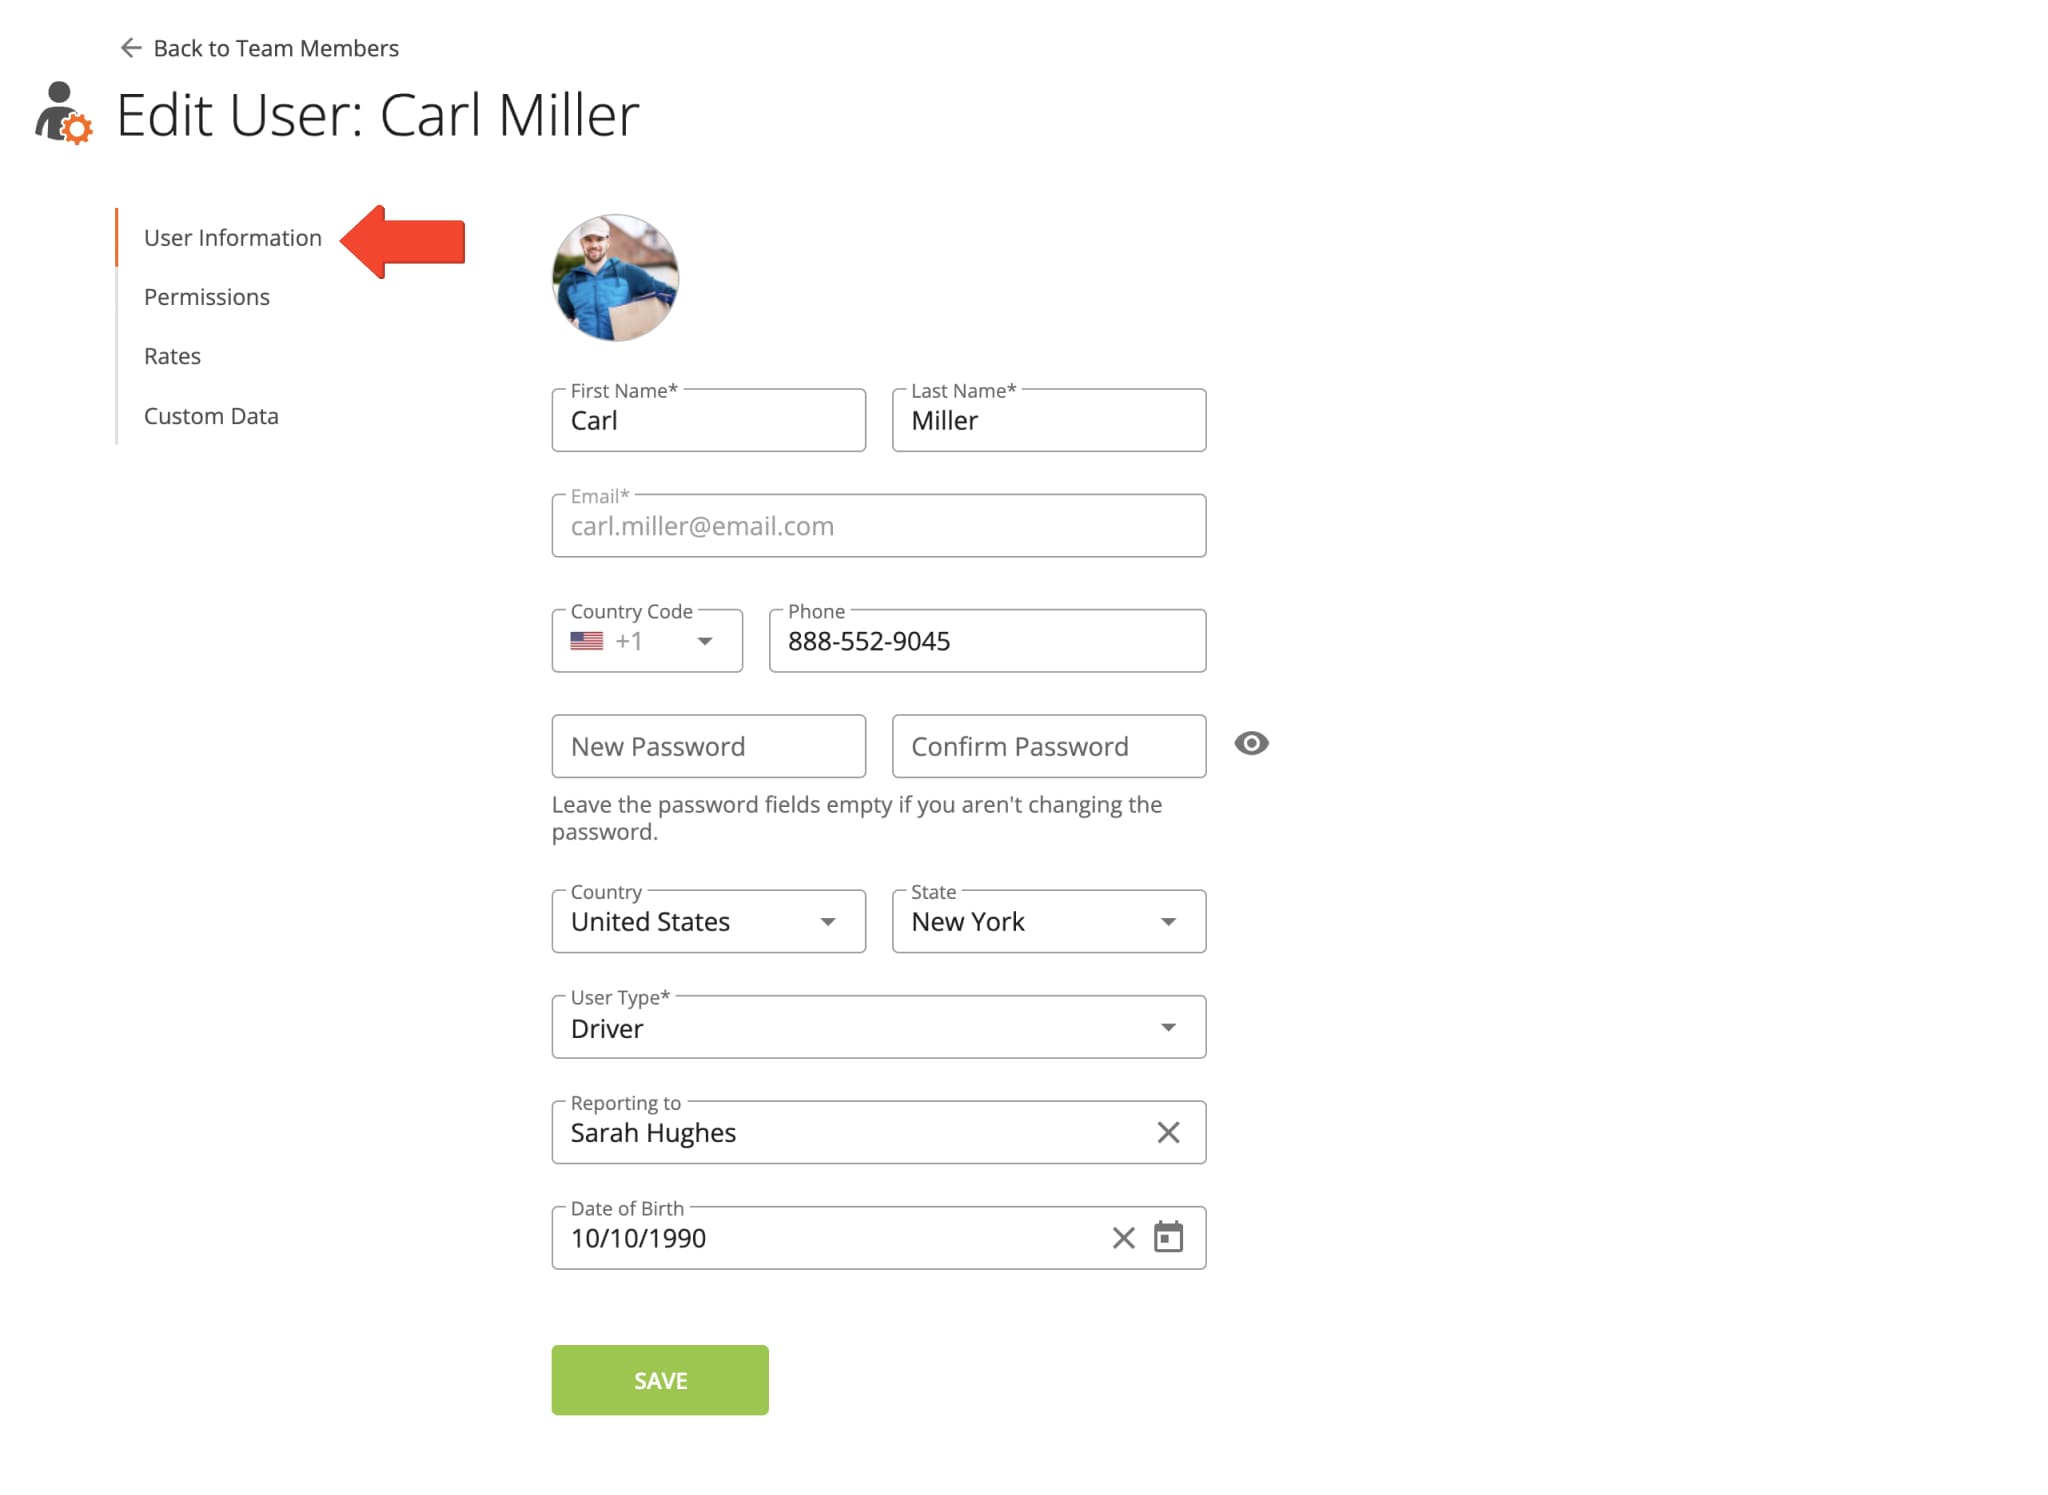 Edit general team member profile information such as user name, email address, password, and user type for drivers, route planners, etc.